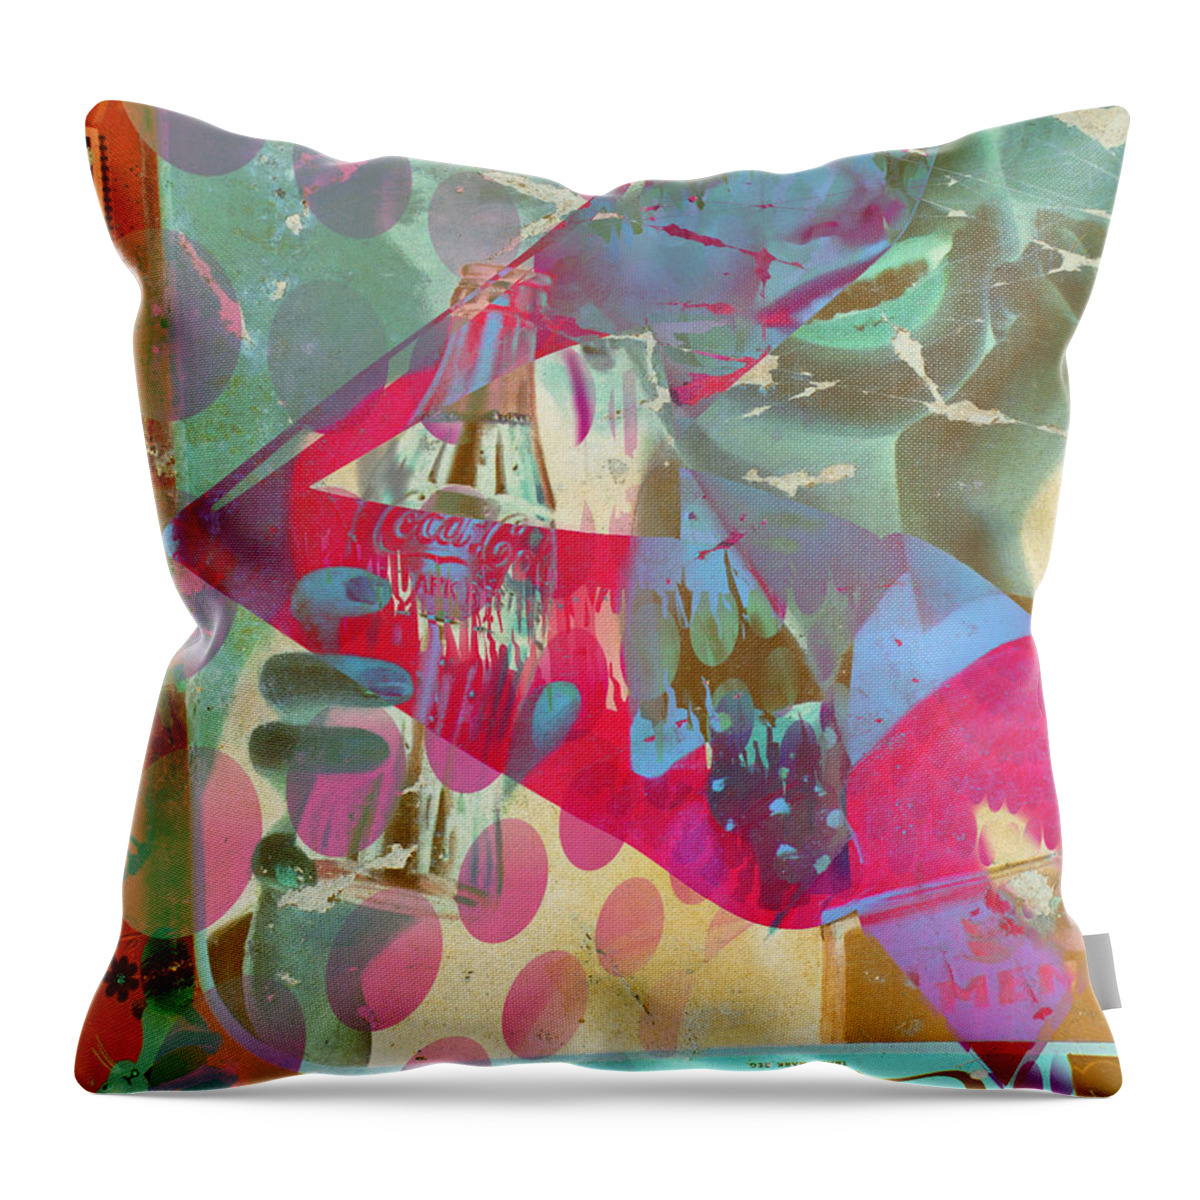 Abstract Throw Pillow featuring the photograph Seduction Of Soda by J C